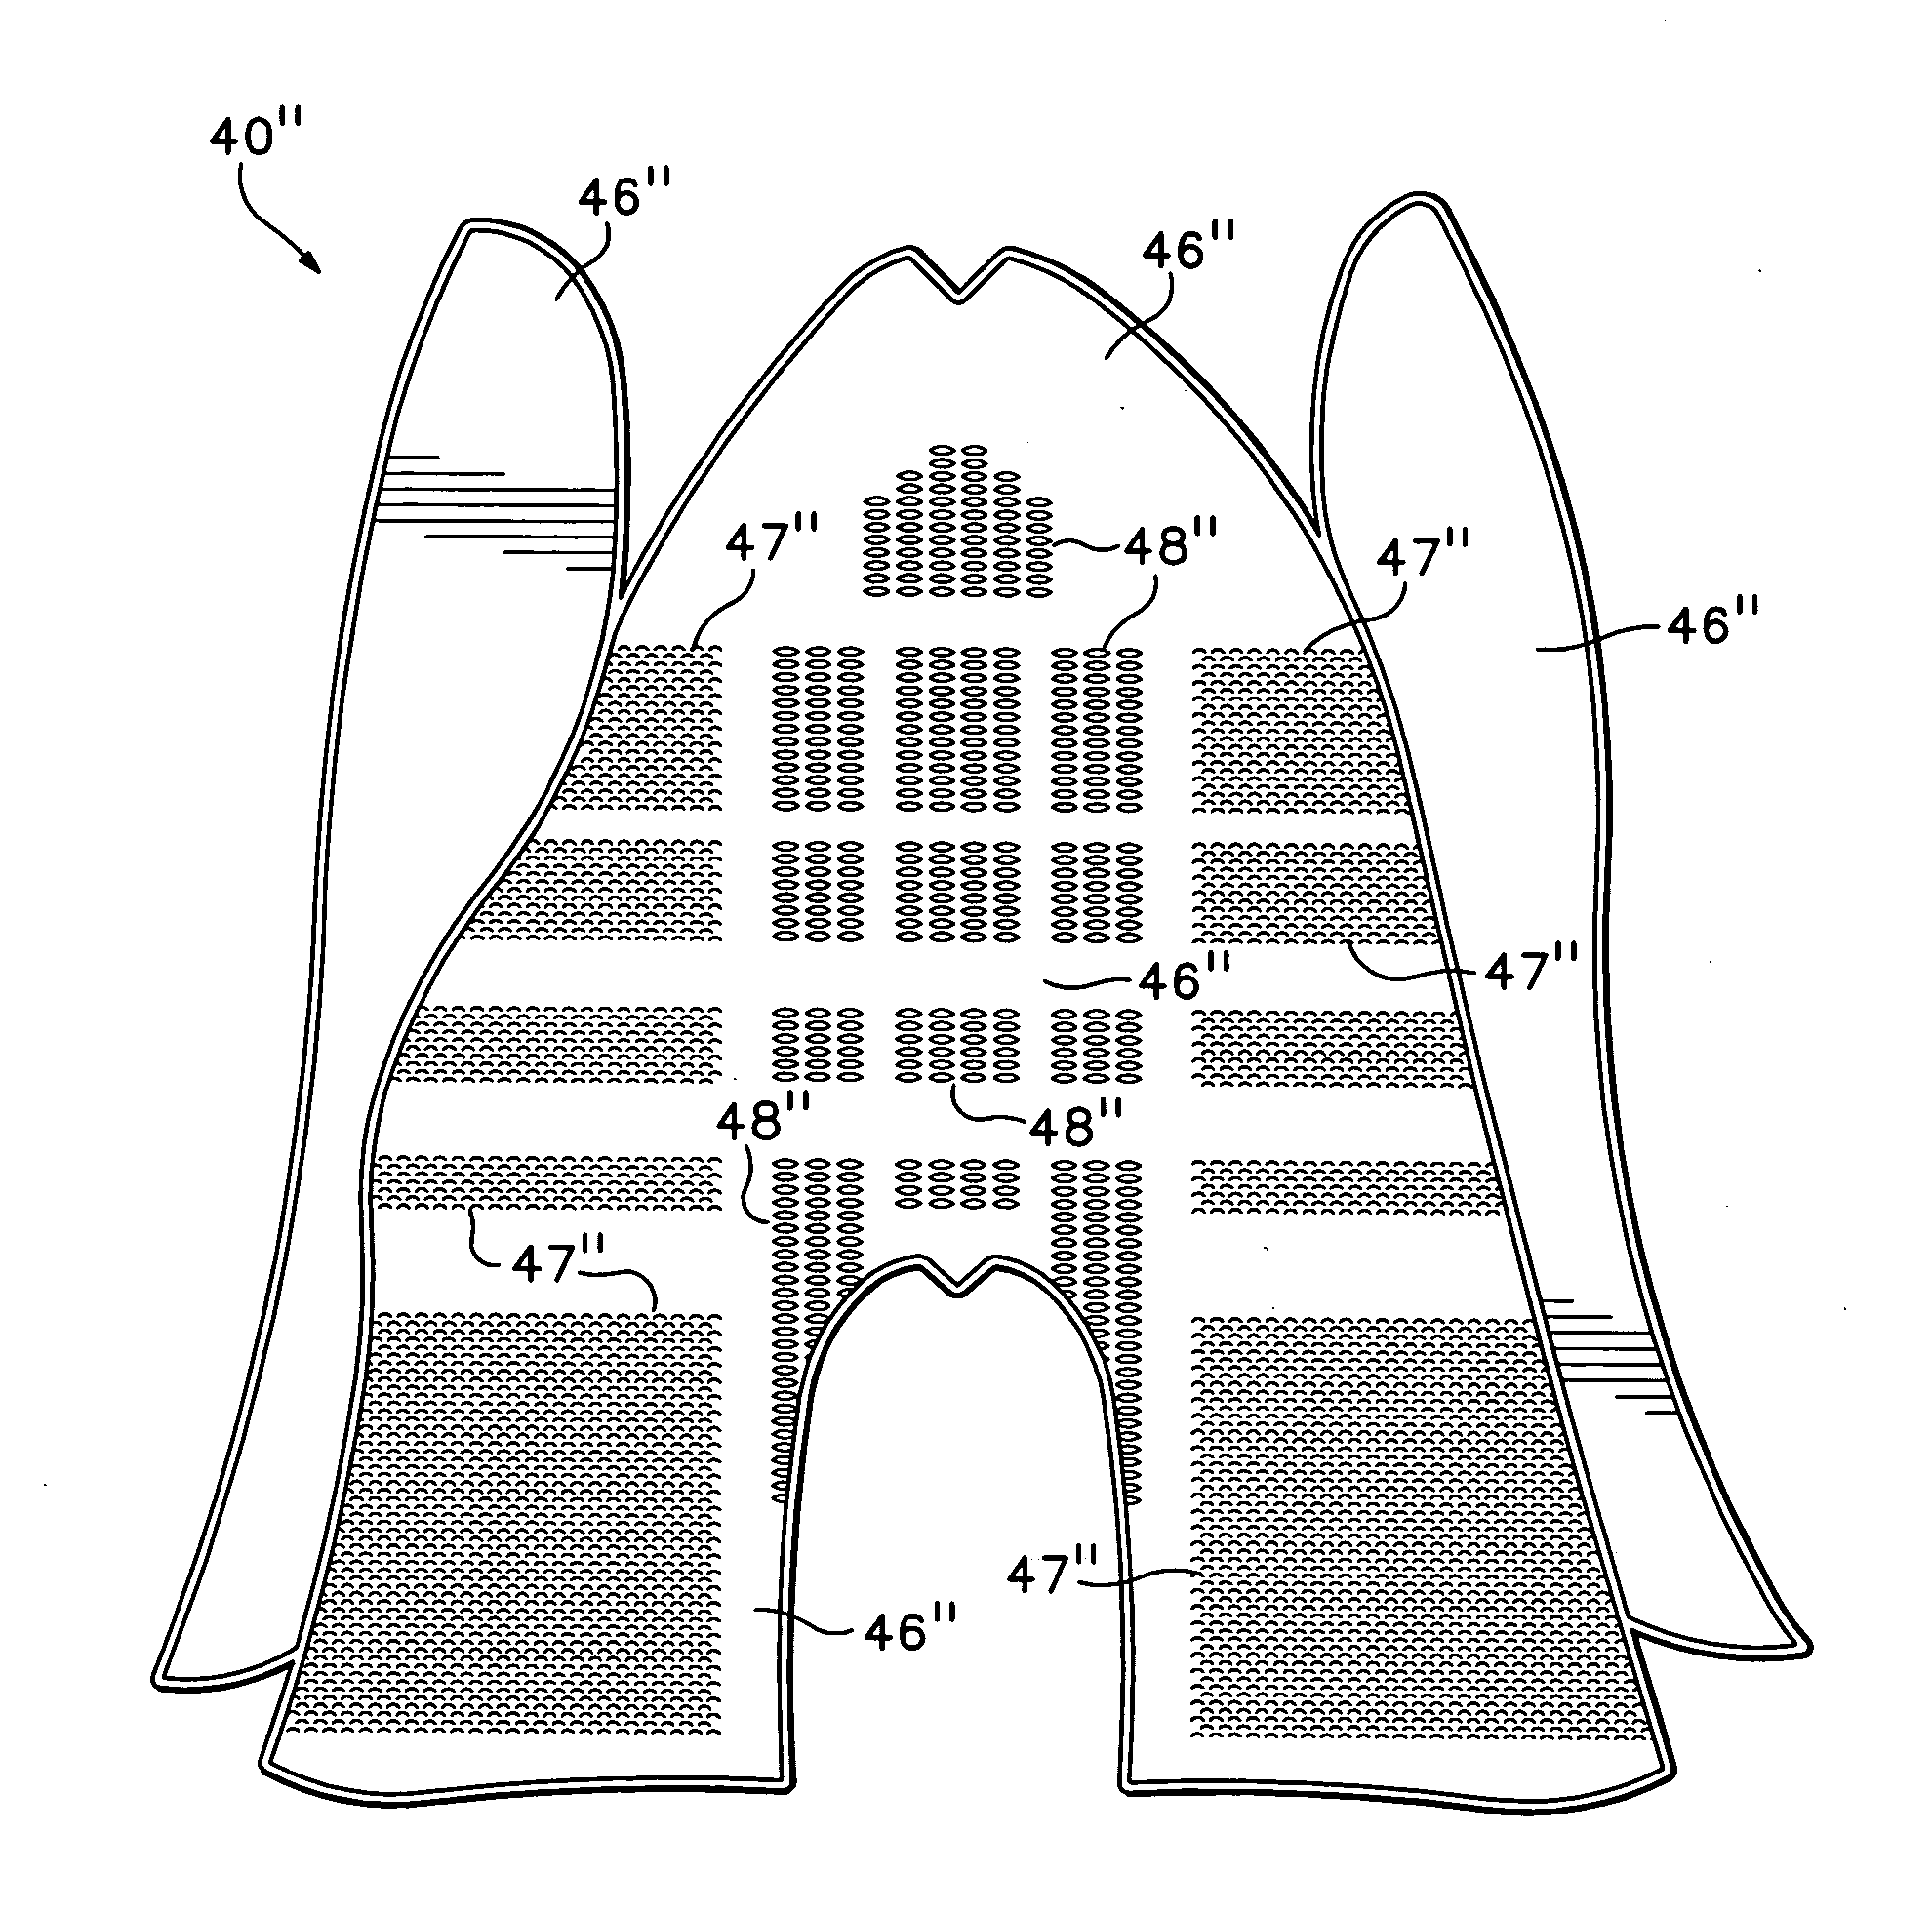 Article of footwear having a textile upper